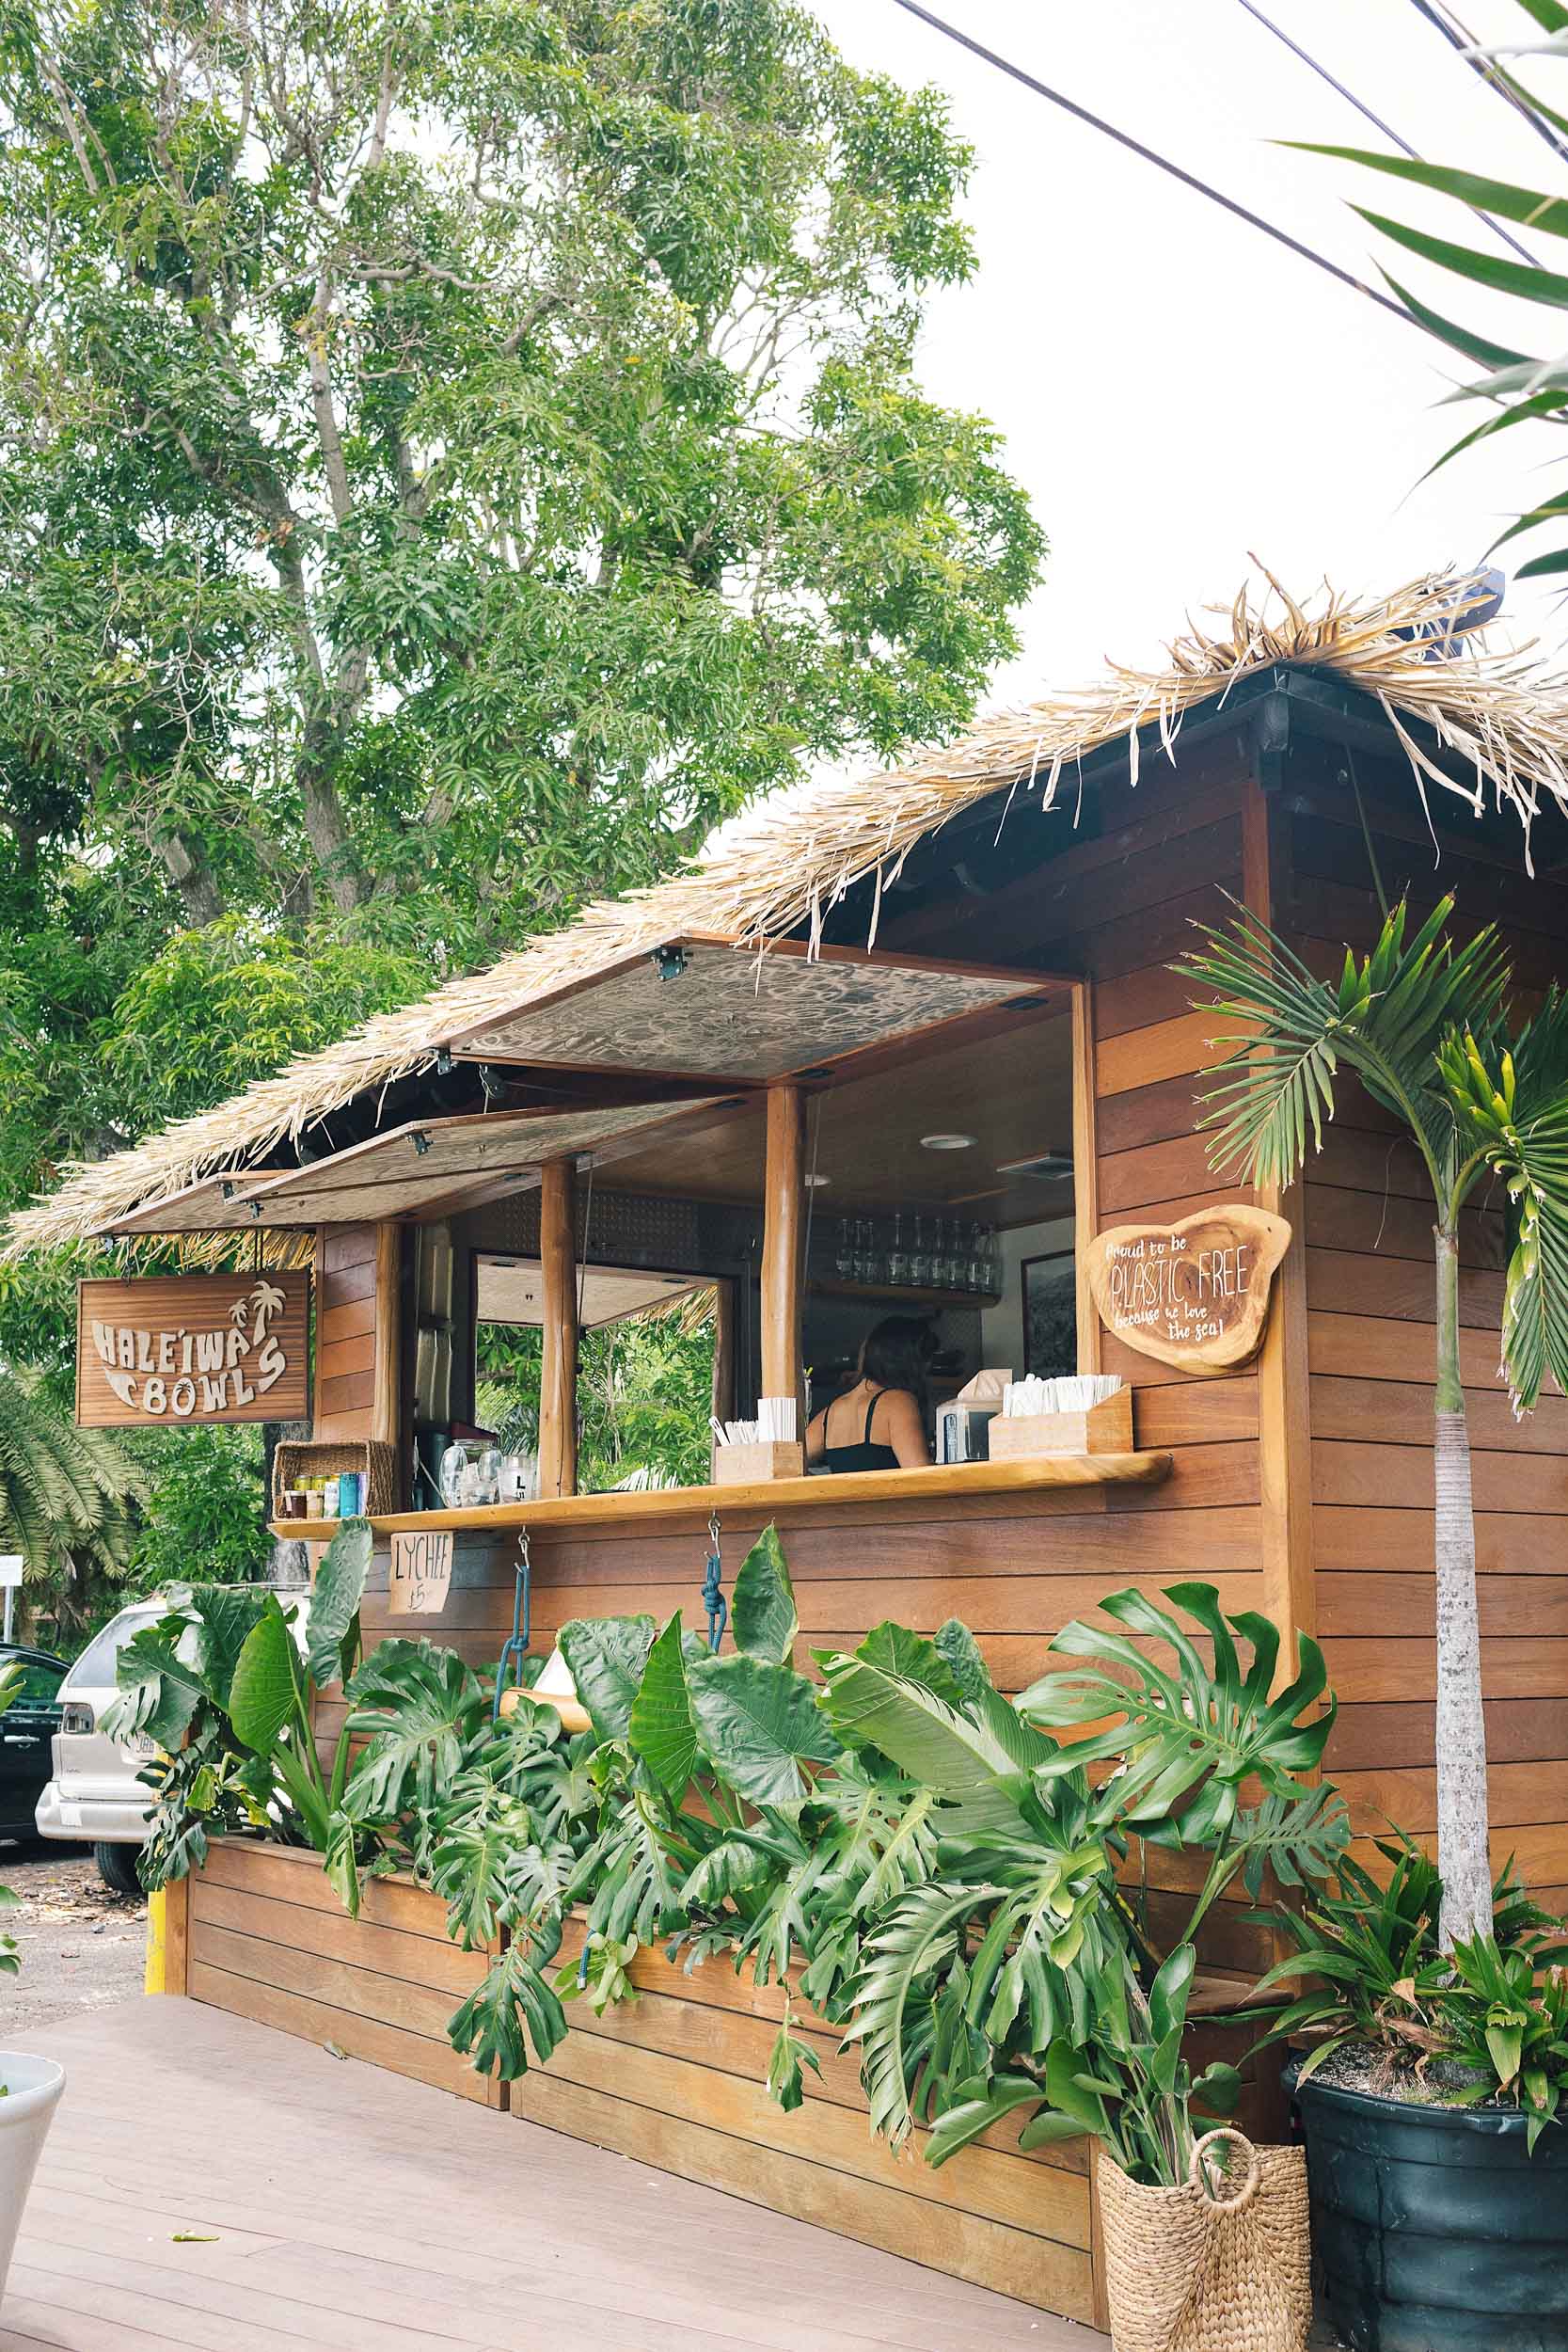 The Haleiwa Bowls shack in Haleiwa on Oahu's North Shore